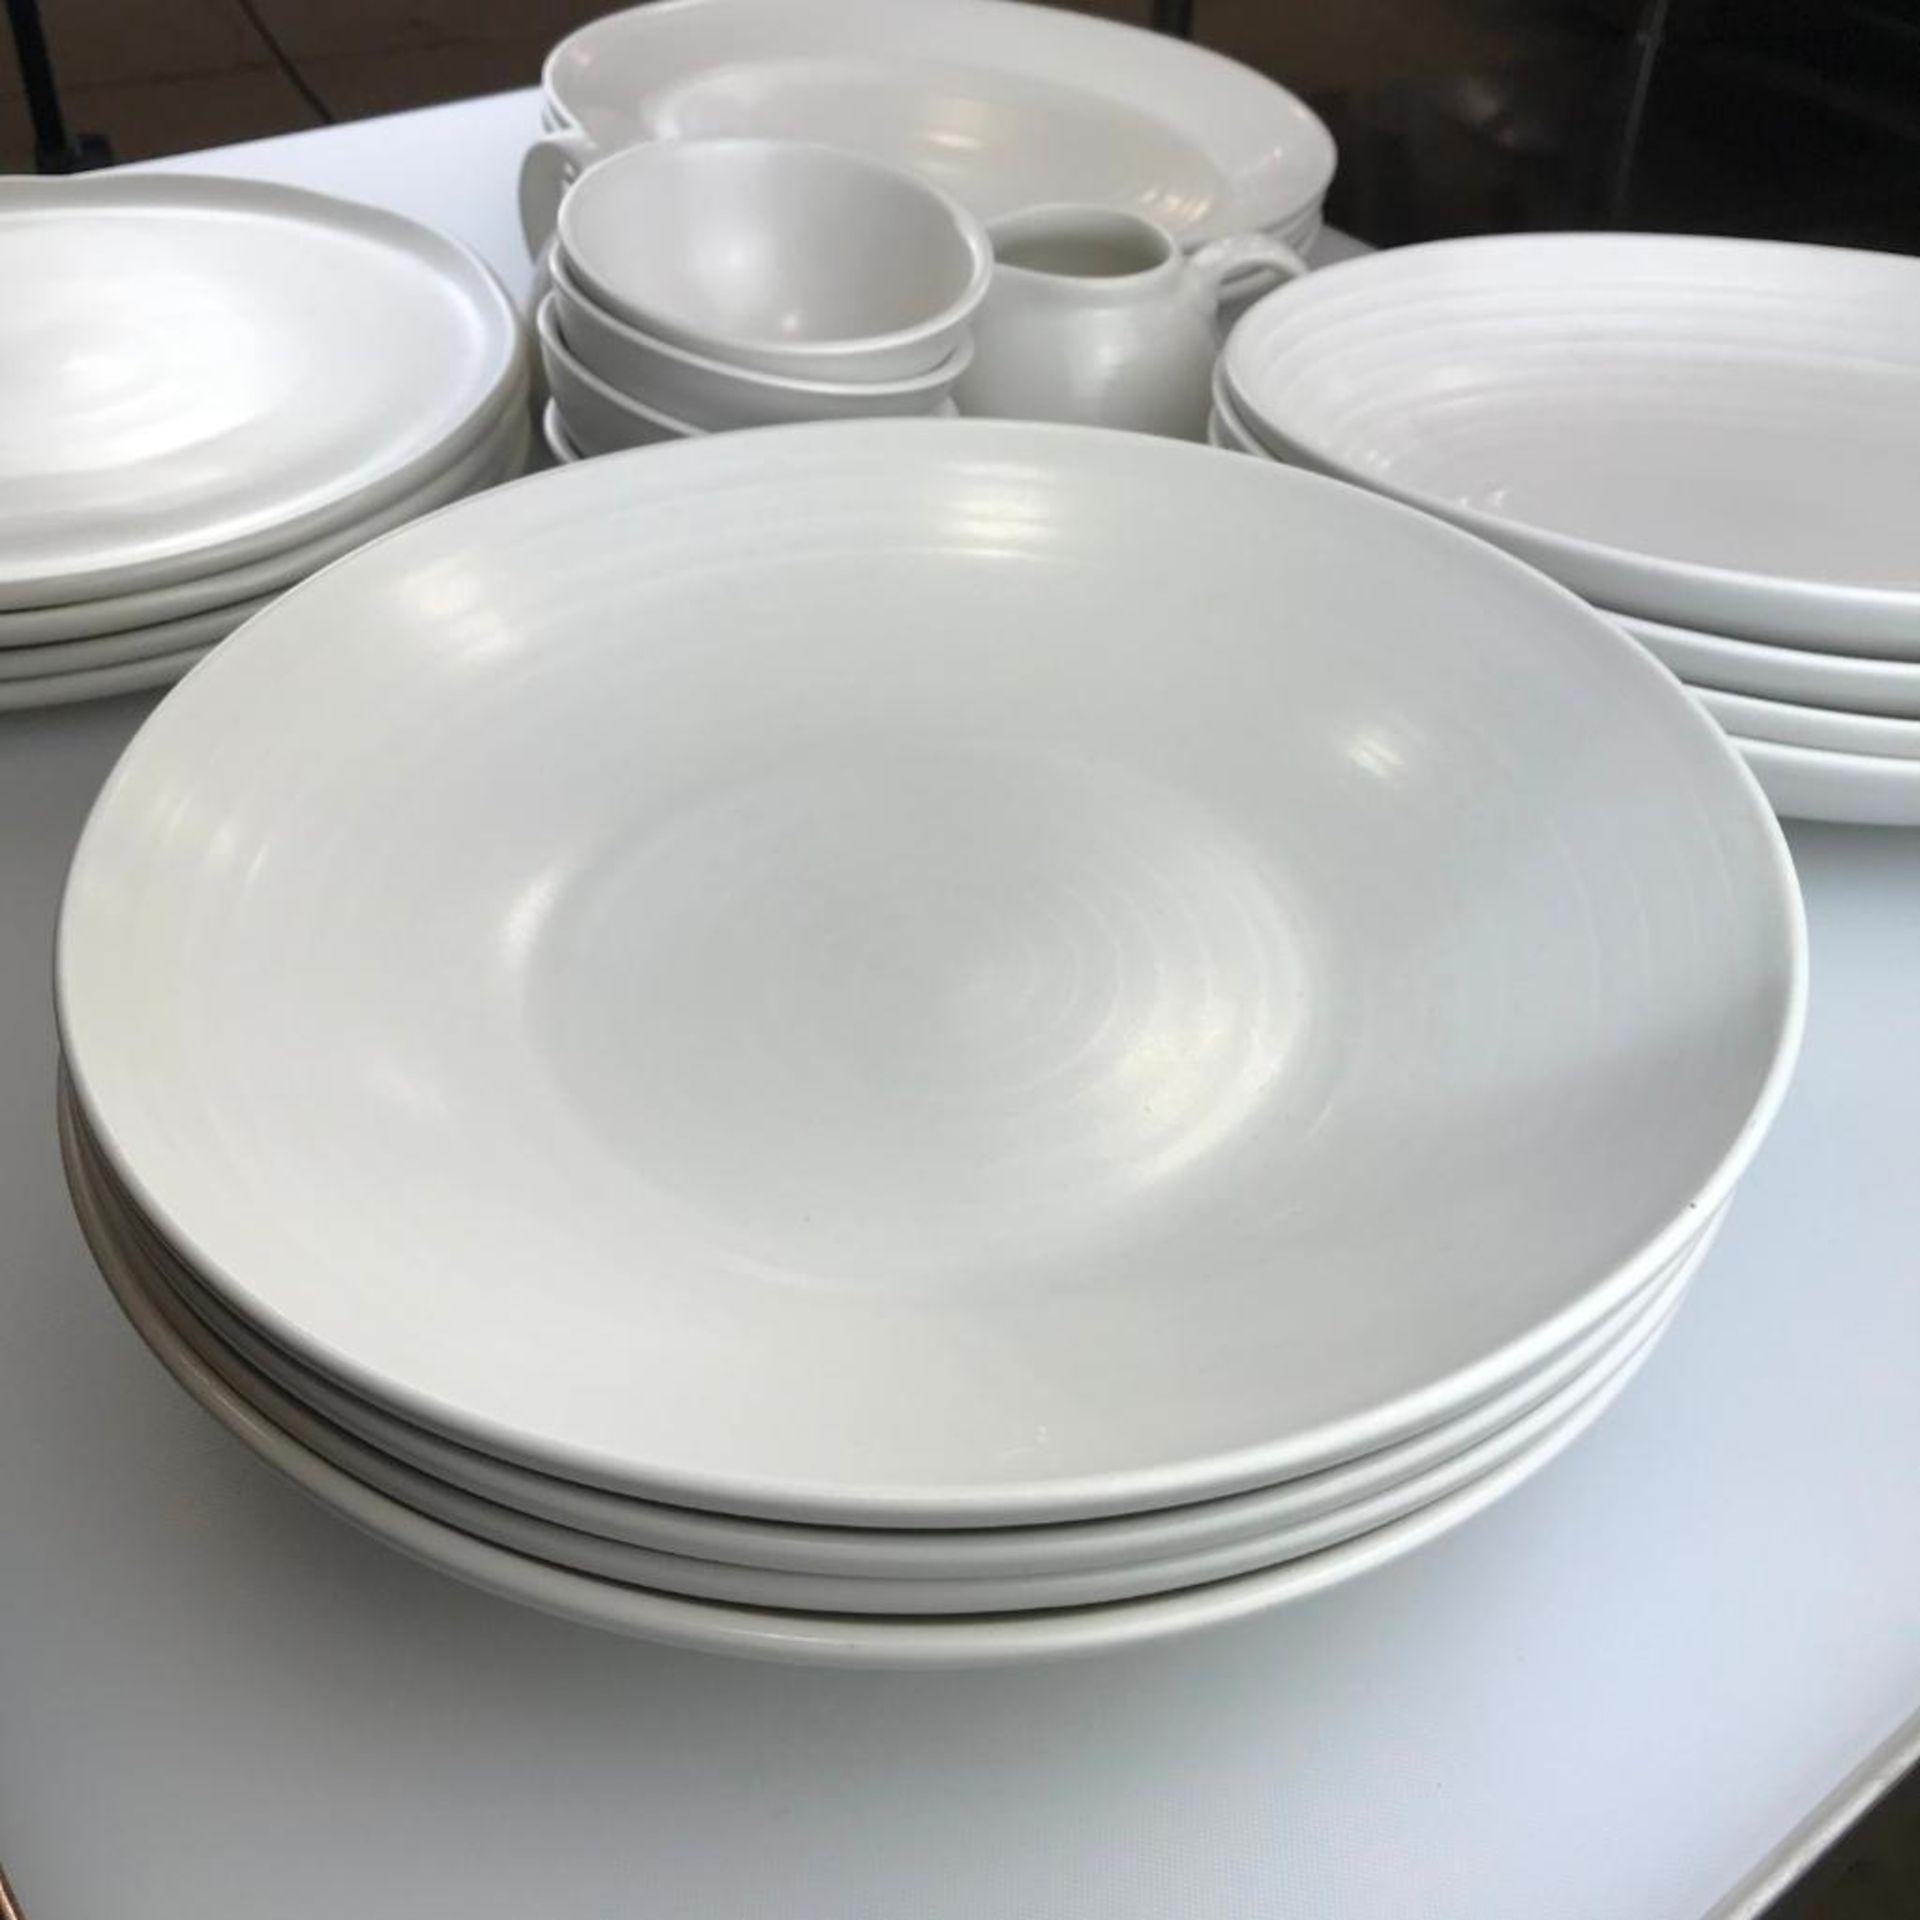 22 PIECE DUDSON EVO PEARL DINNERWARE SET, MADE IN ENGLAND - Image 4 of 8